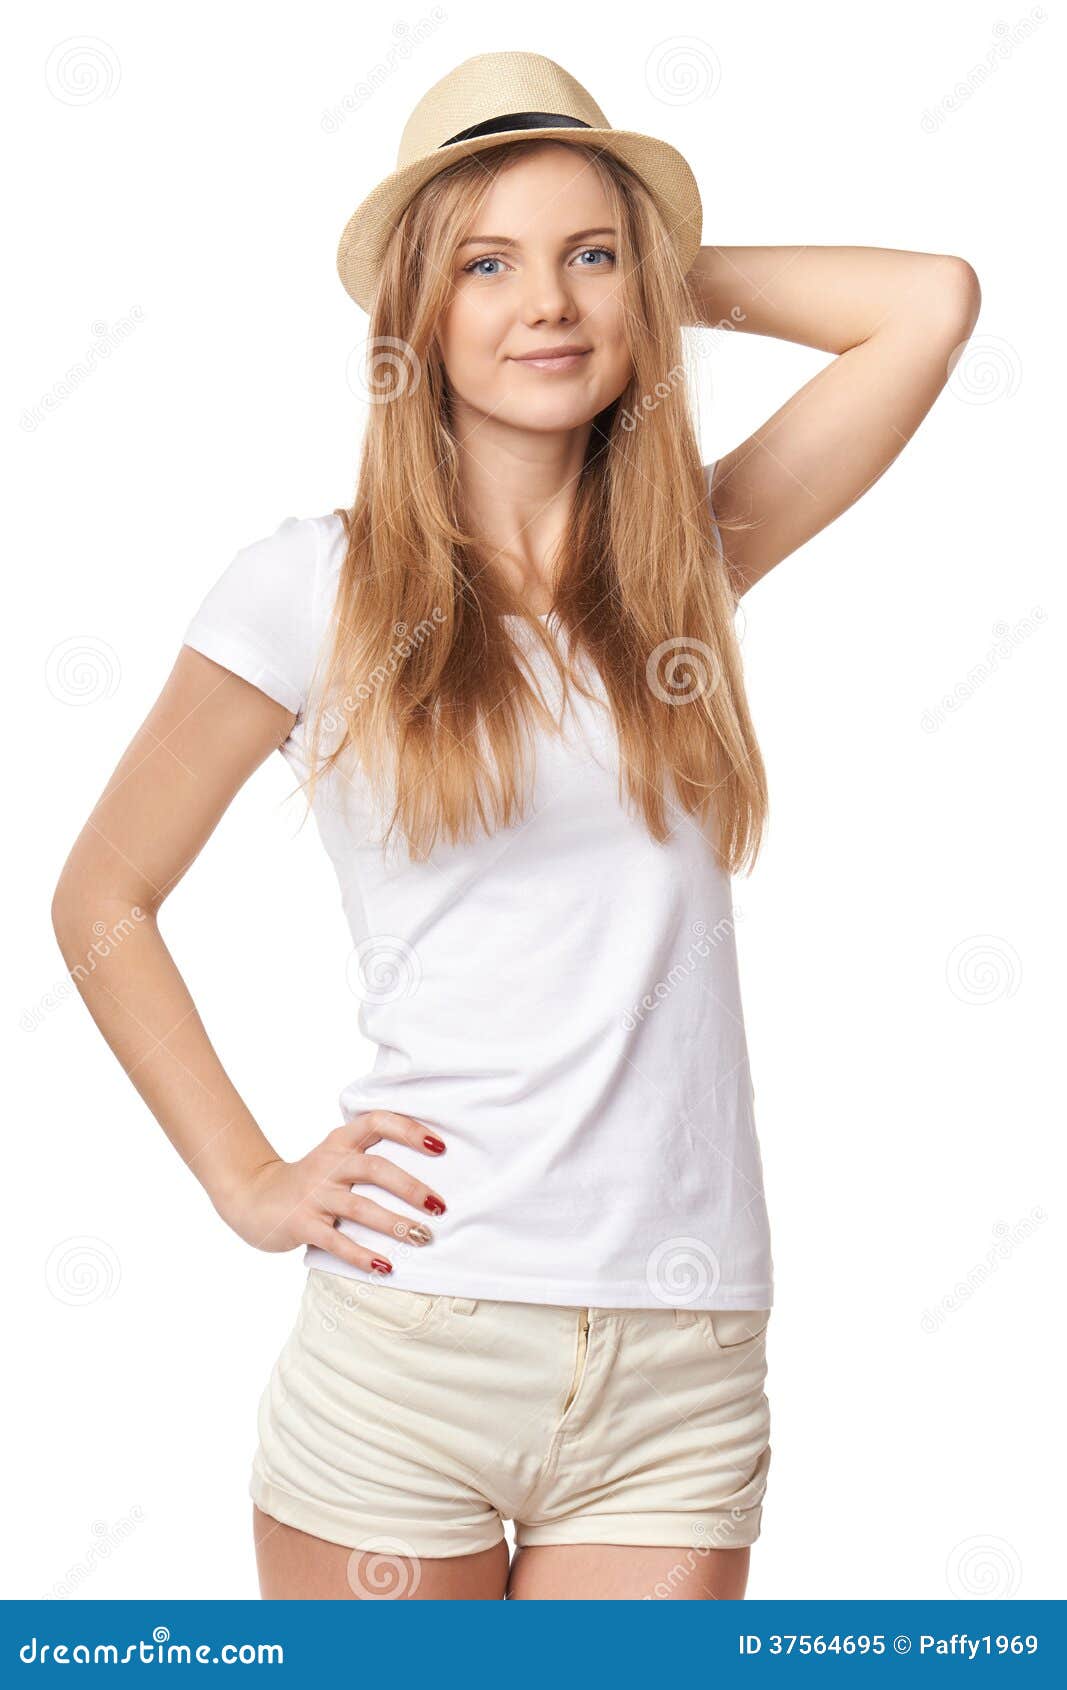 Royalty Free Teens Posing For 82